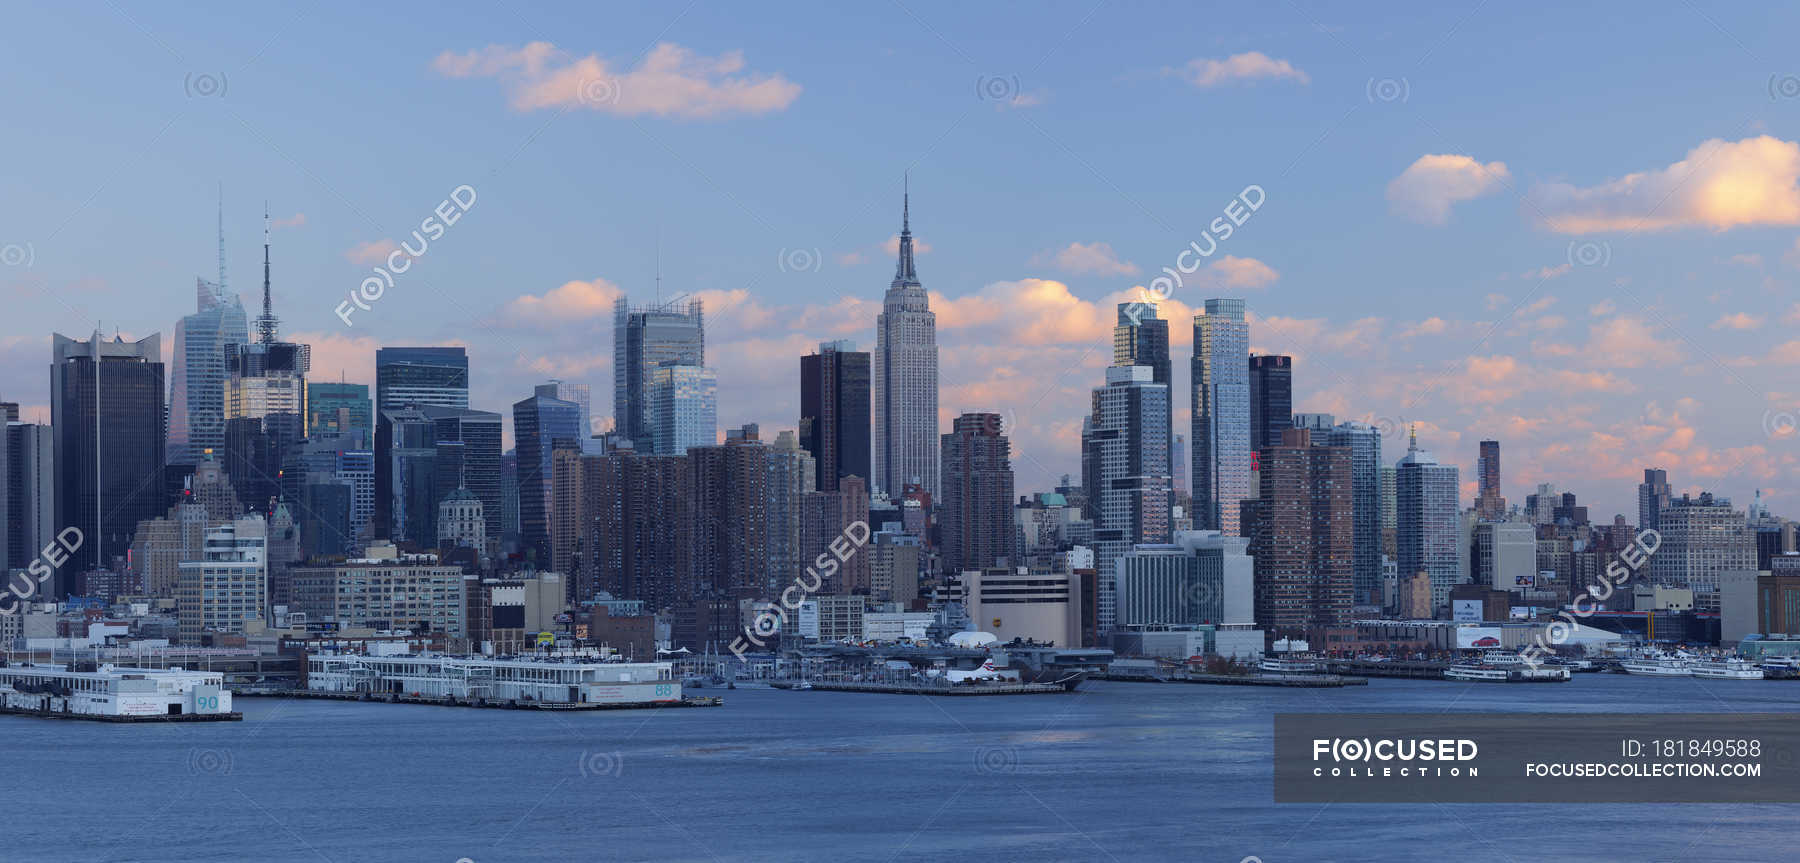 Manhattan Skyline From New Jersey Across Hudson River In Evening Dusk, New York State, New Jersey, Usa — Aerial, Financial - Stock Photo | #181849588